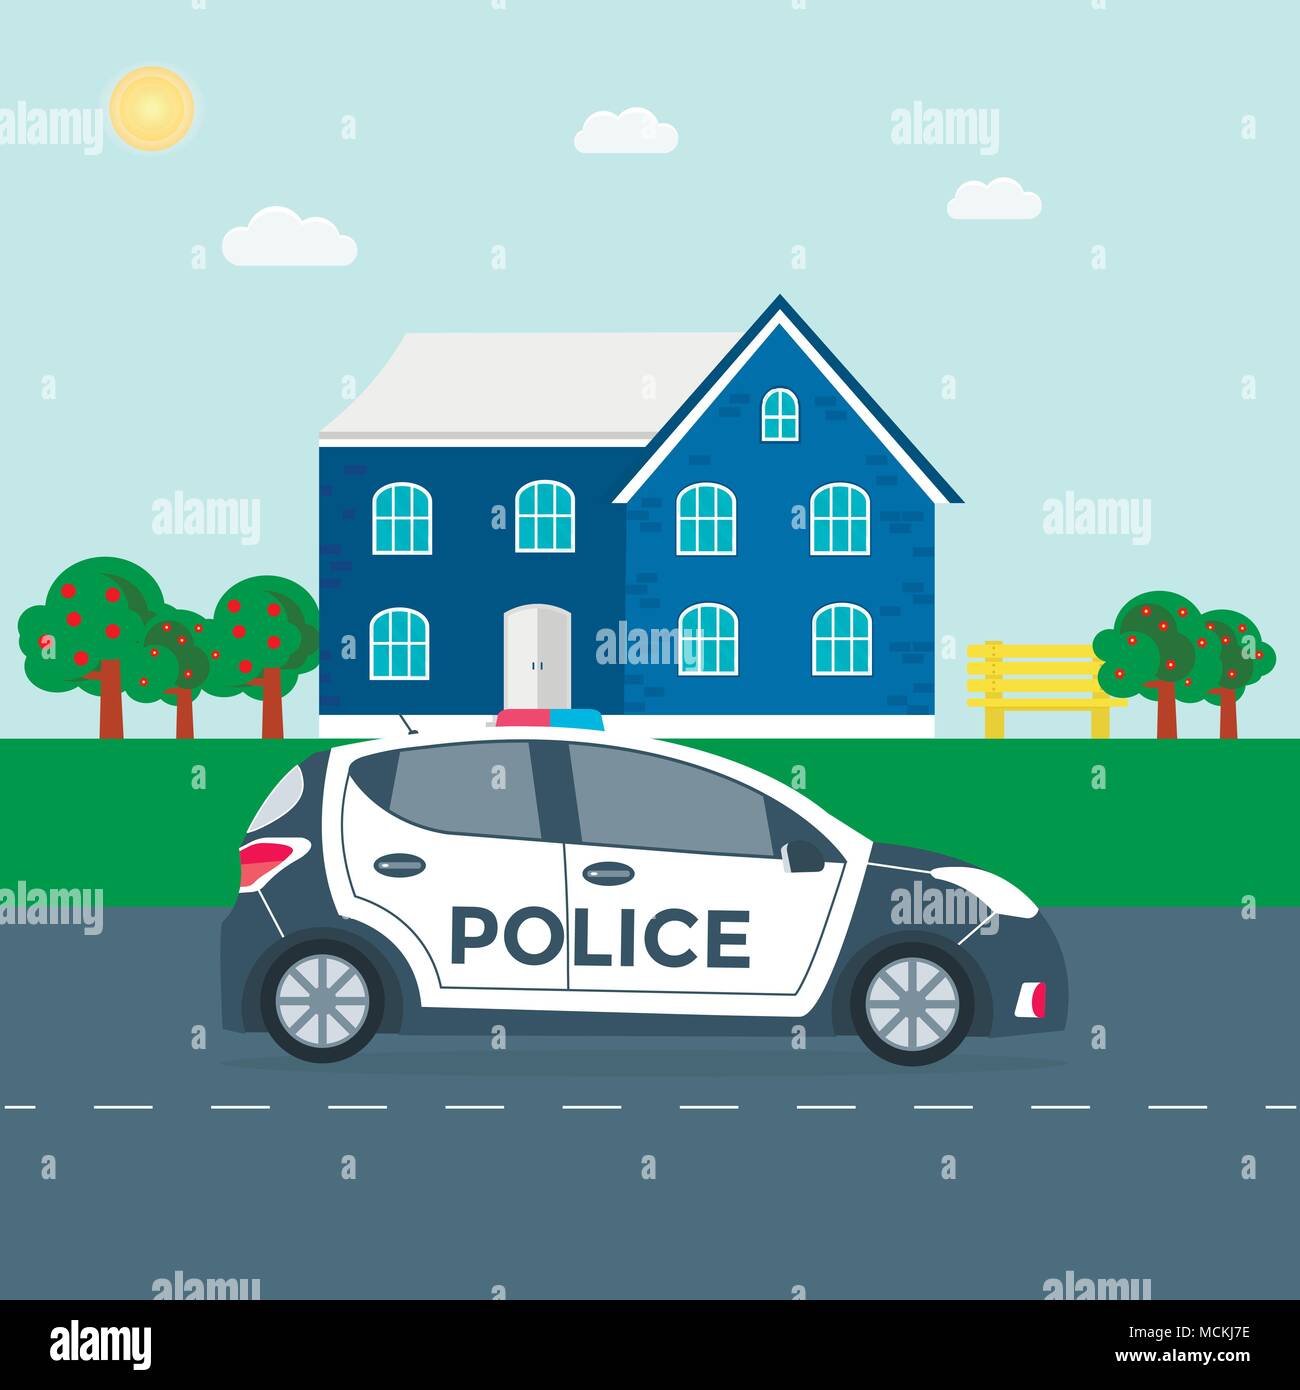 Police patrol on a road with police car, house, nature landscape, vehicle with rooftop flashing lights. Flat vector illustration. Stock Vector